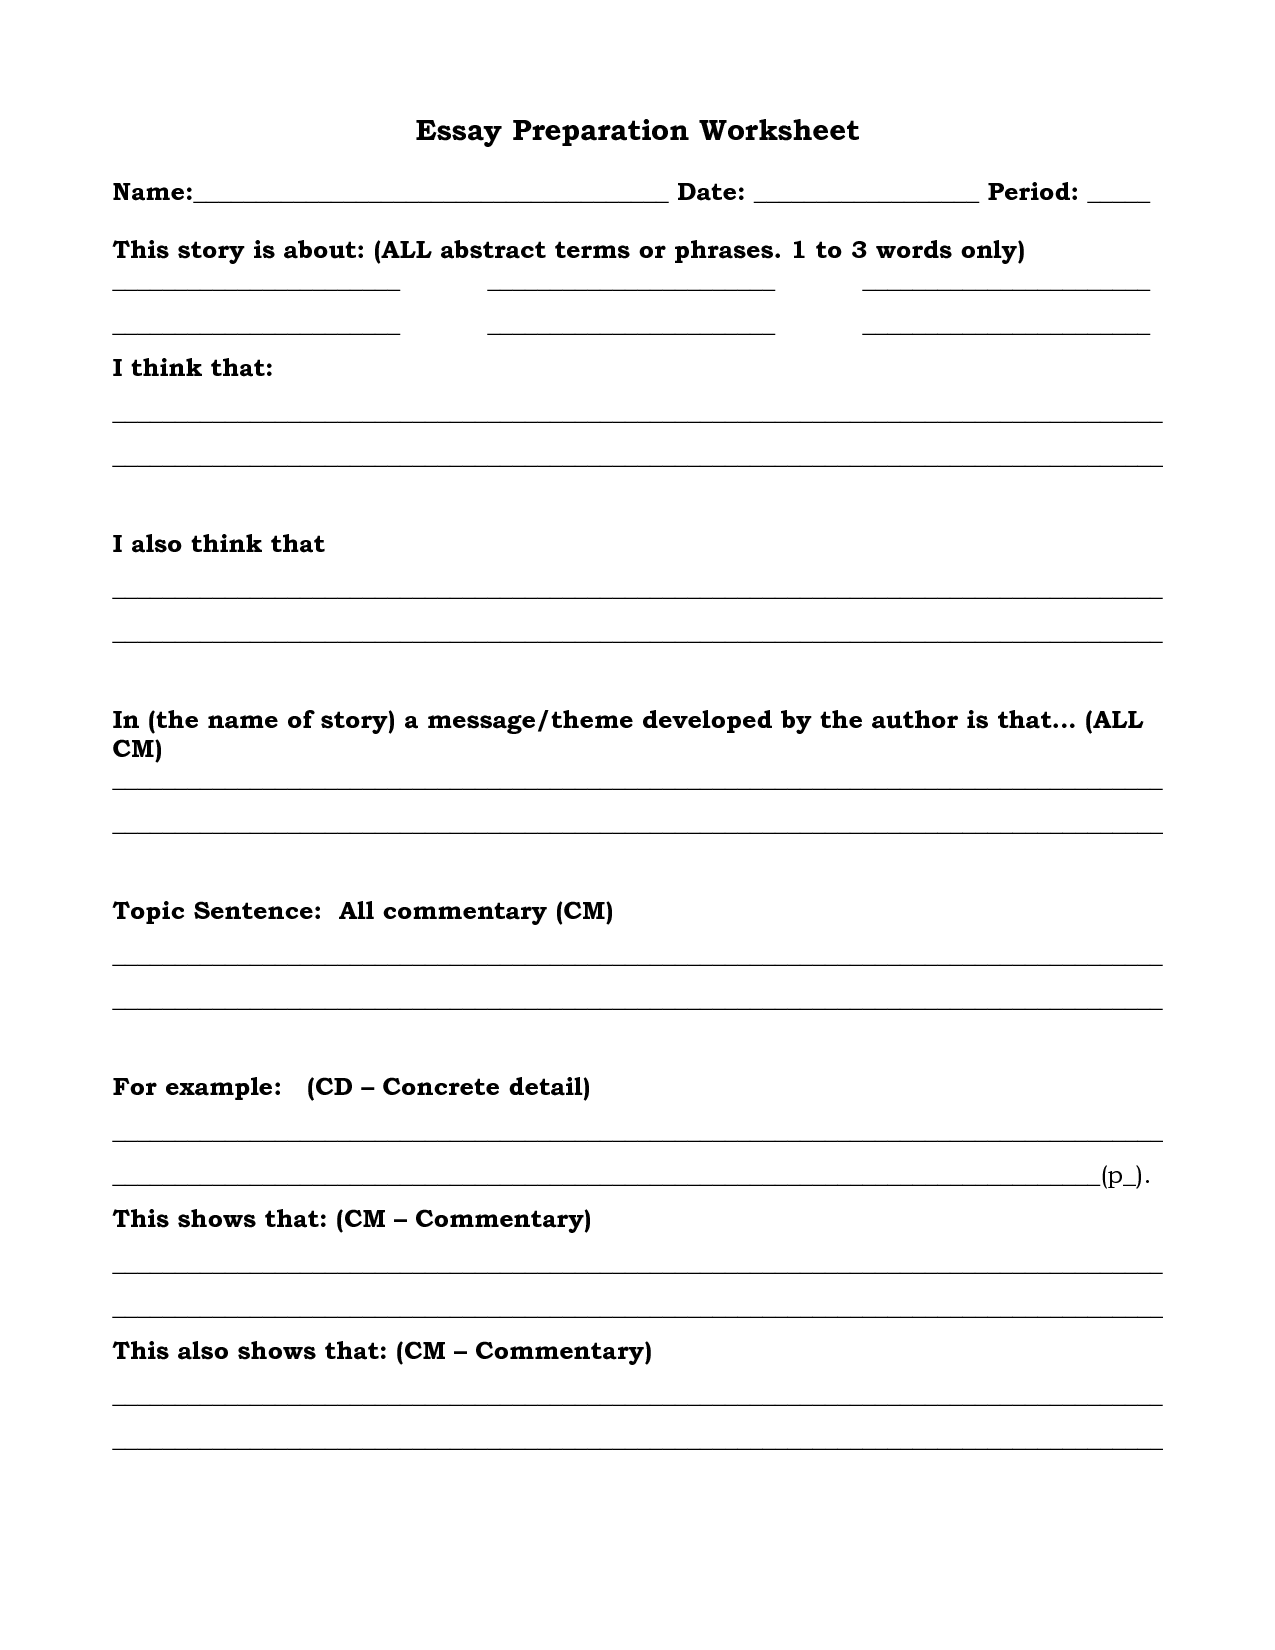 17-best-images-of-transition-phrases-and-english-worksheet-1-describing-people-worksheet